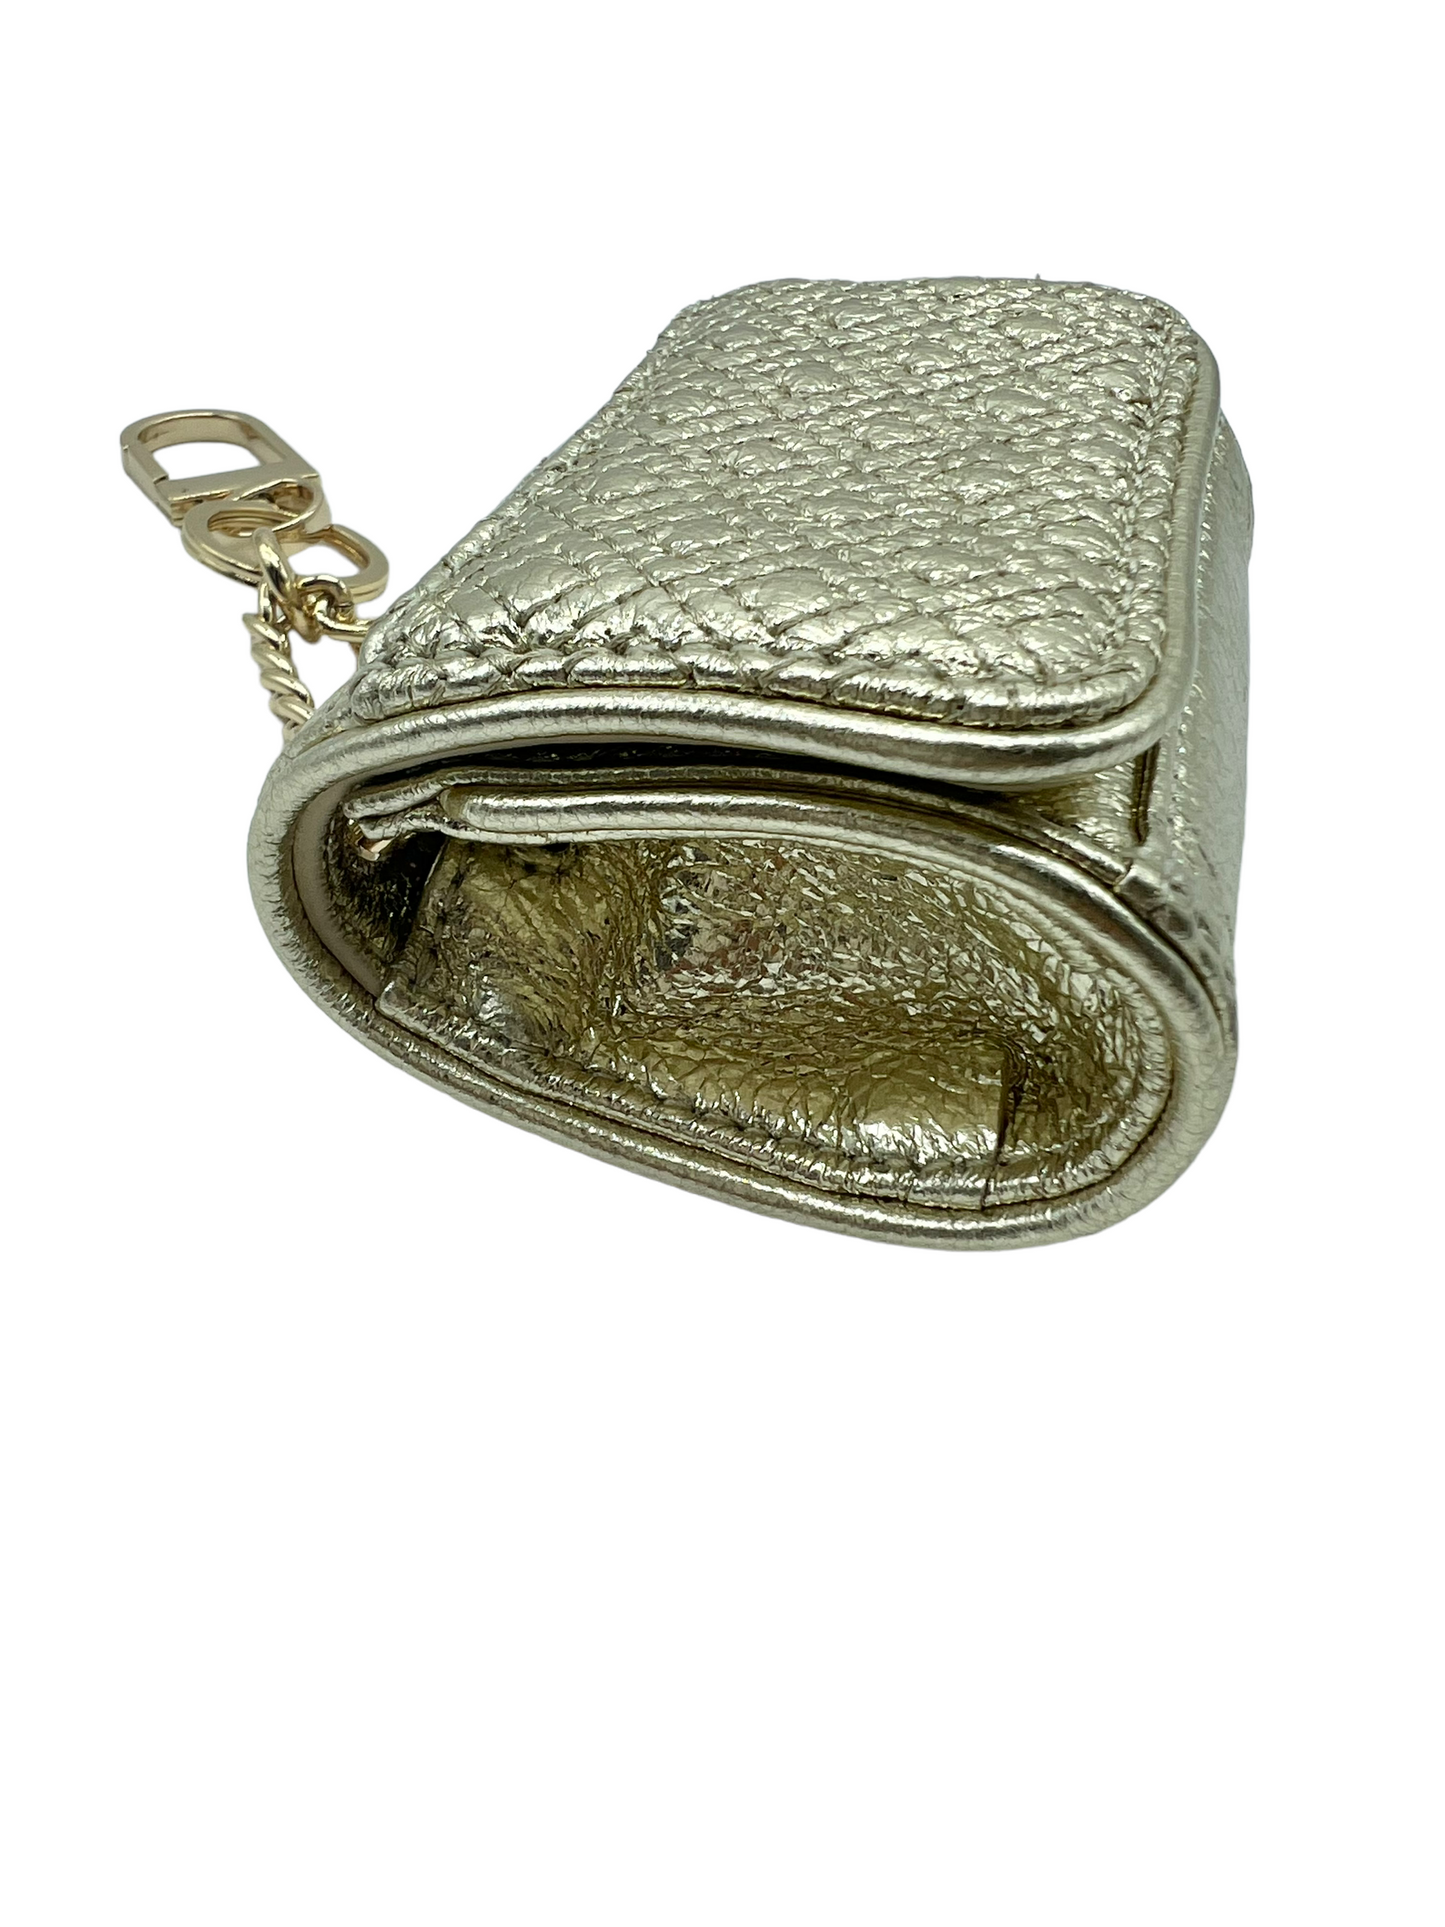 Tory Burch Gold Leather Fleming Keychain